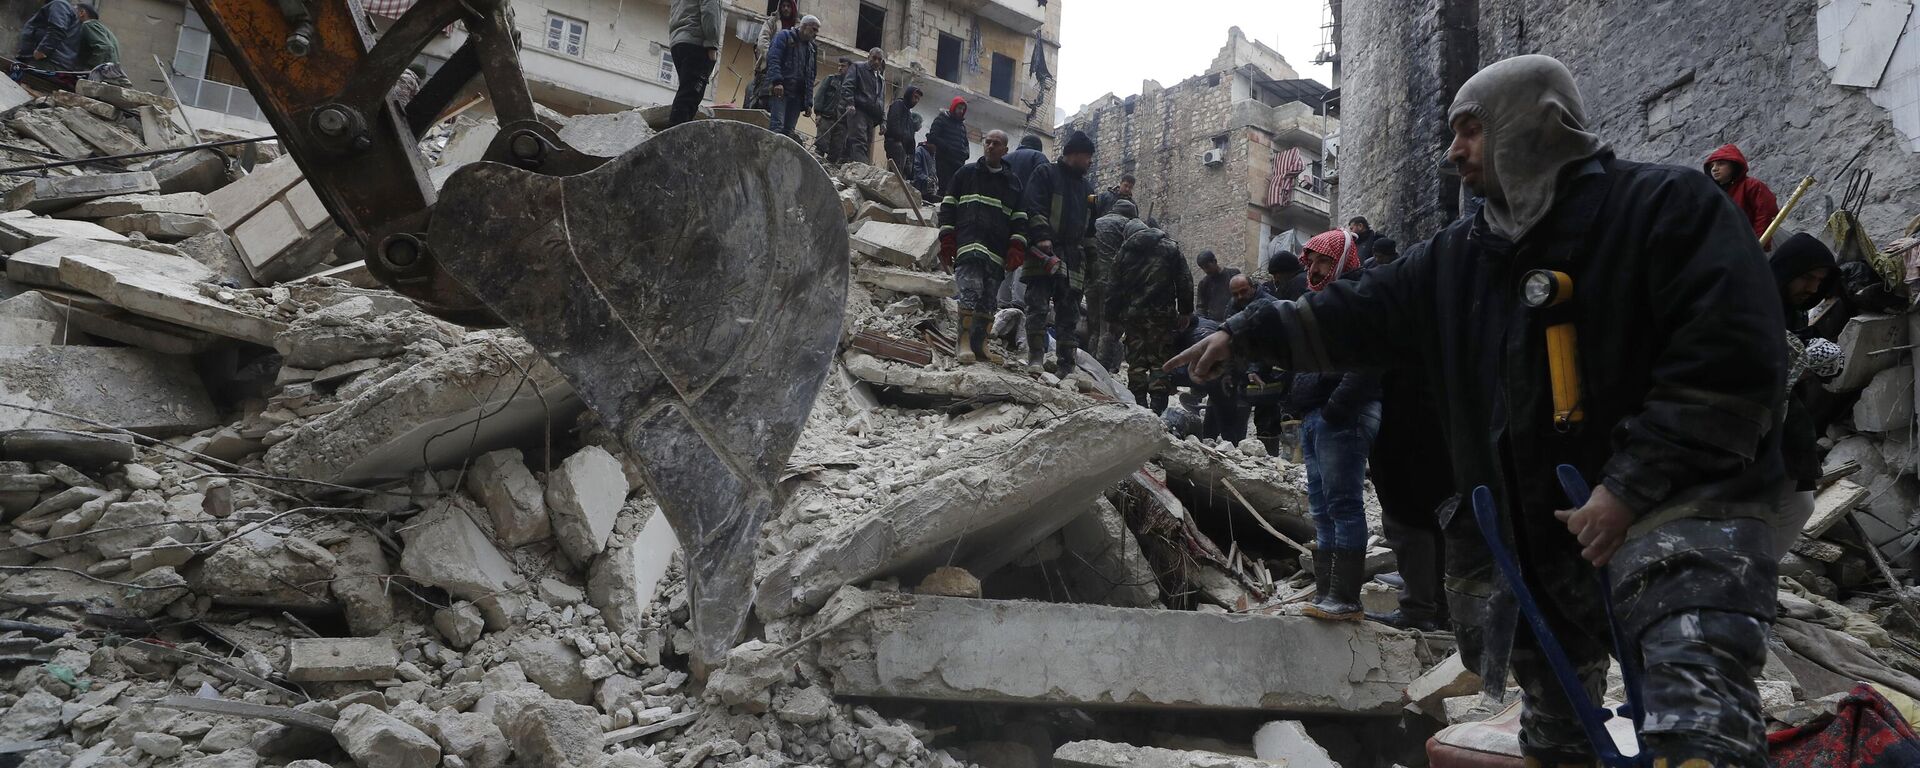 Syrian Civil Defense workers and security forces search through the wreckage of collapsed buildings, in Aleppo, Syria, Monday, February 6, 2023. - Sputnik International, 1920, 08.02.2023